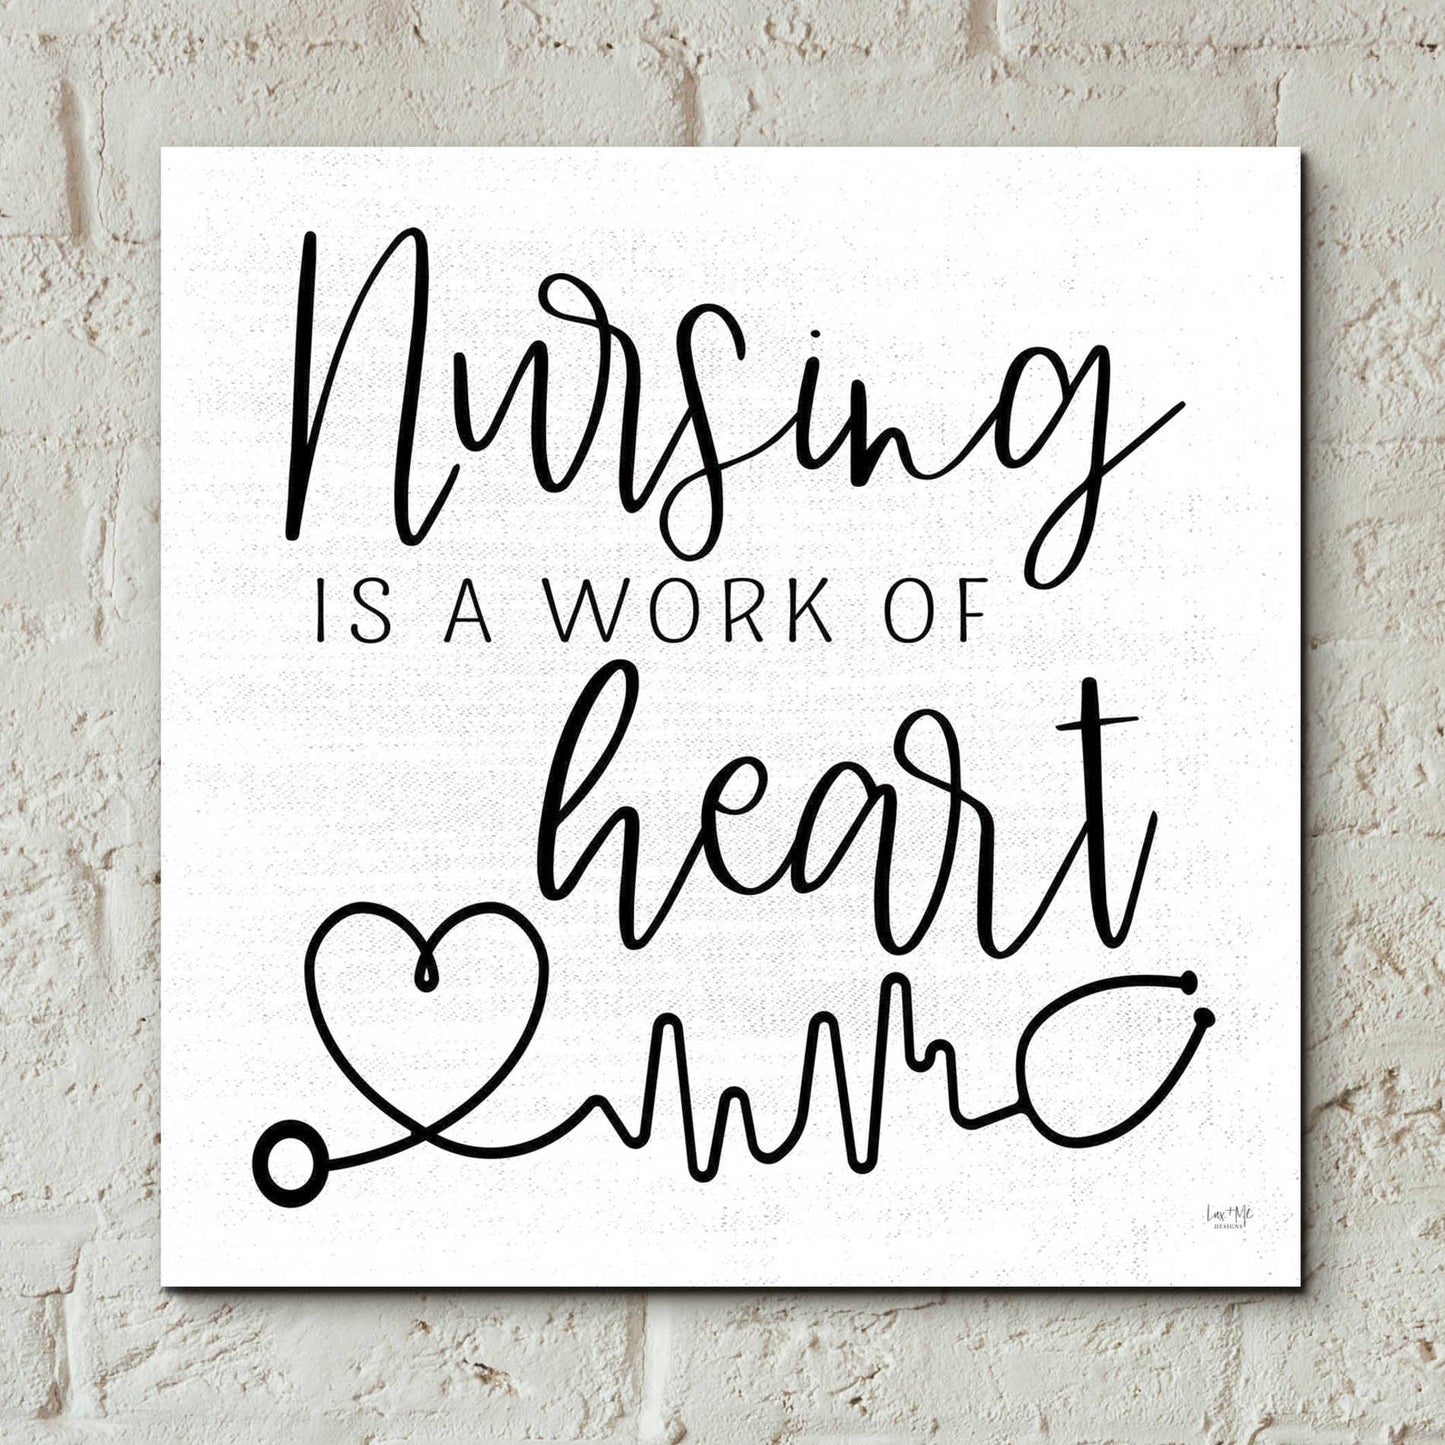 Epic Art 'Nursing a Work of Heart' by Lux + Me Designs, Acrylic Glass Wall Art,12x12